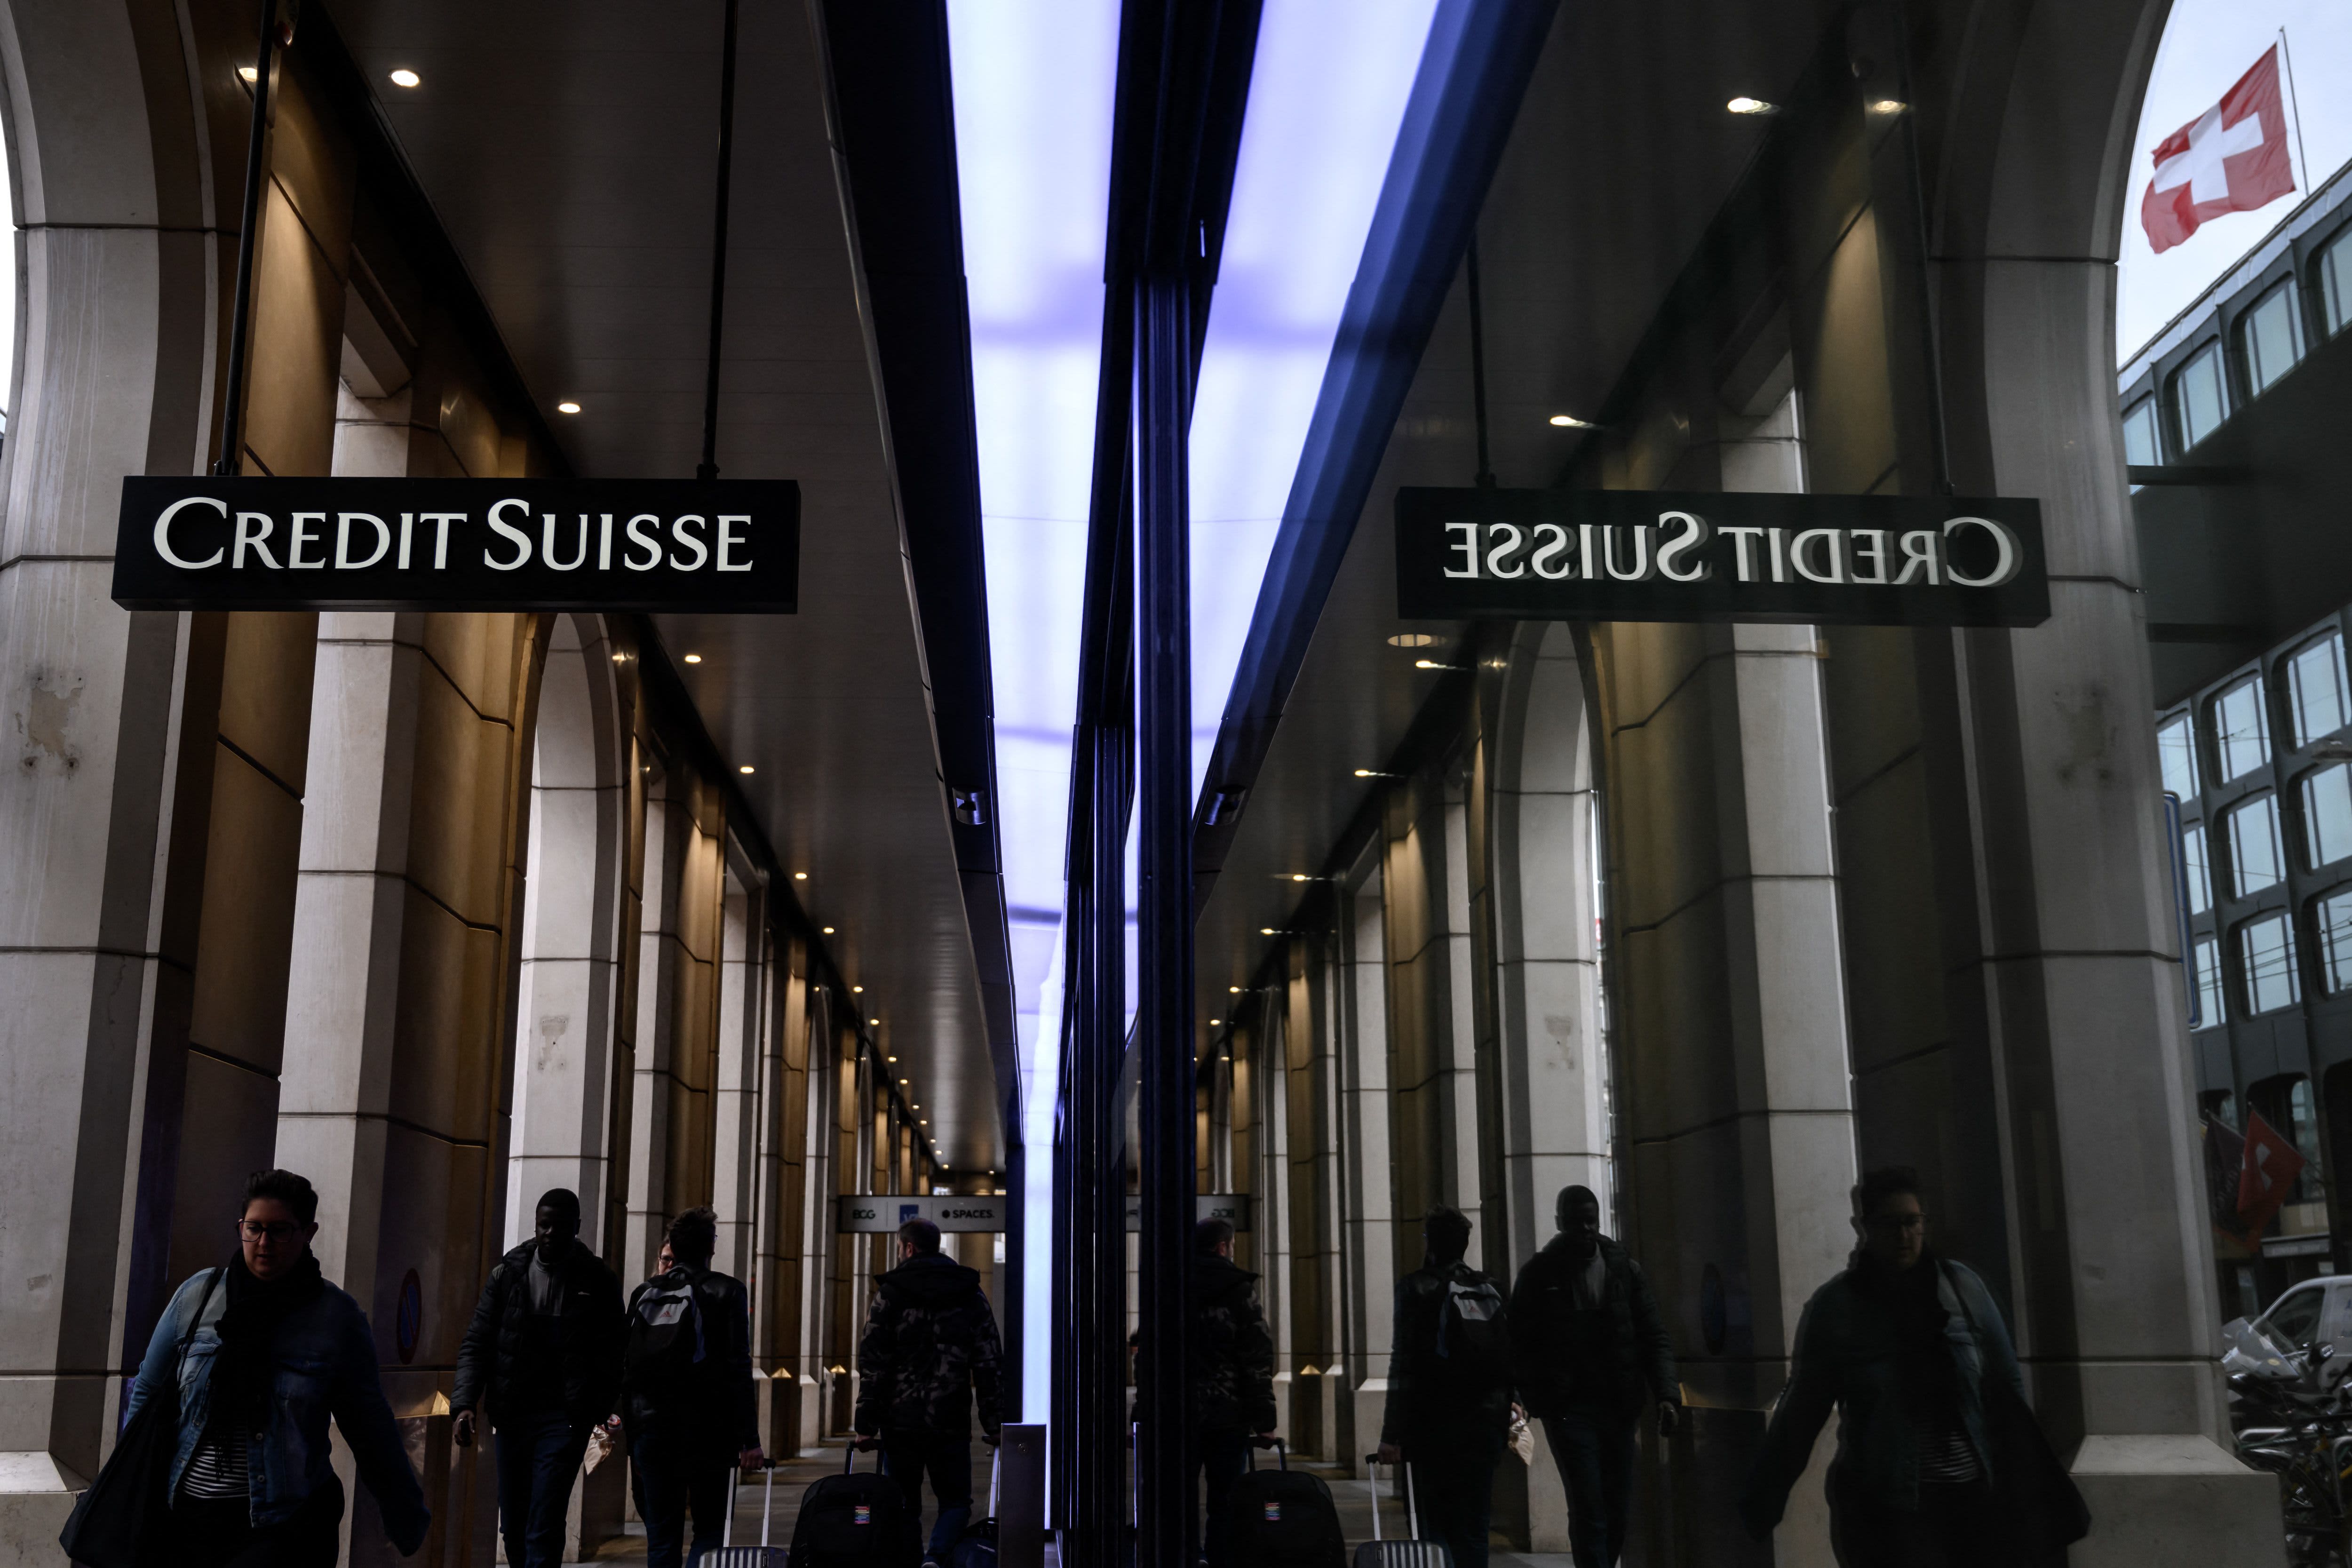 Credit Suisse is under pressure, but short sellers appear to be eyeing another global bank